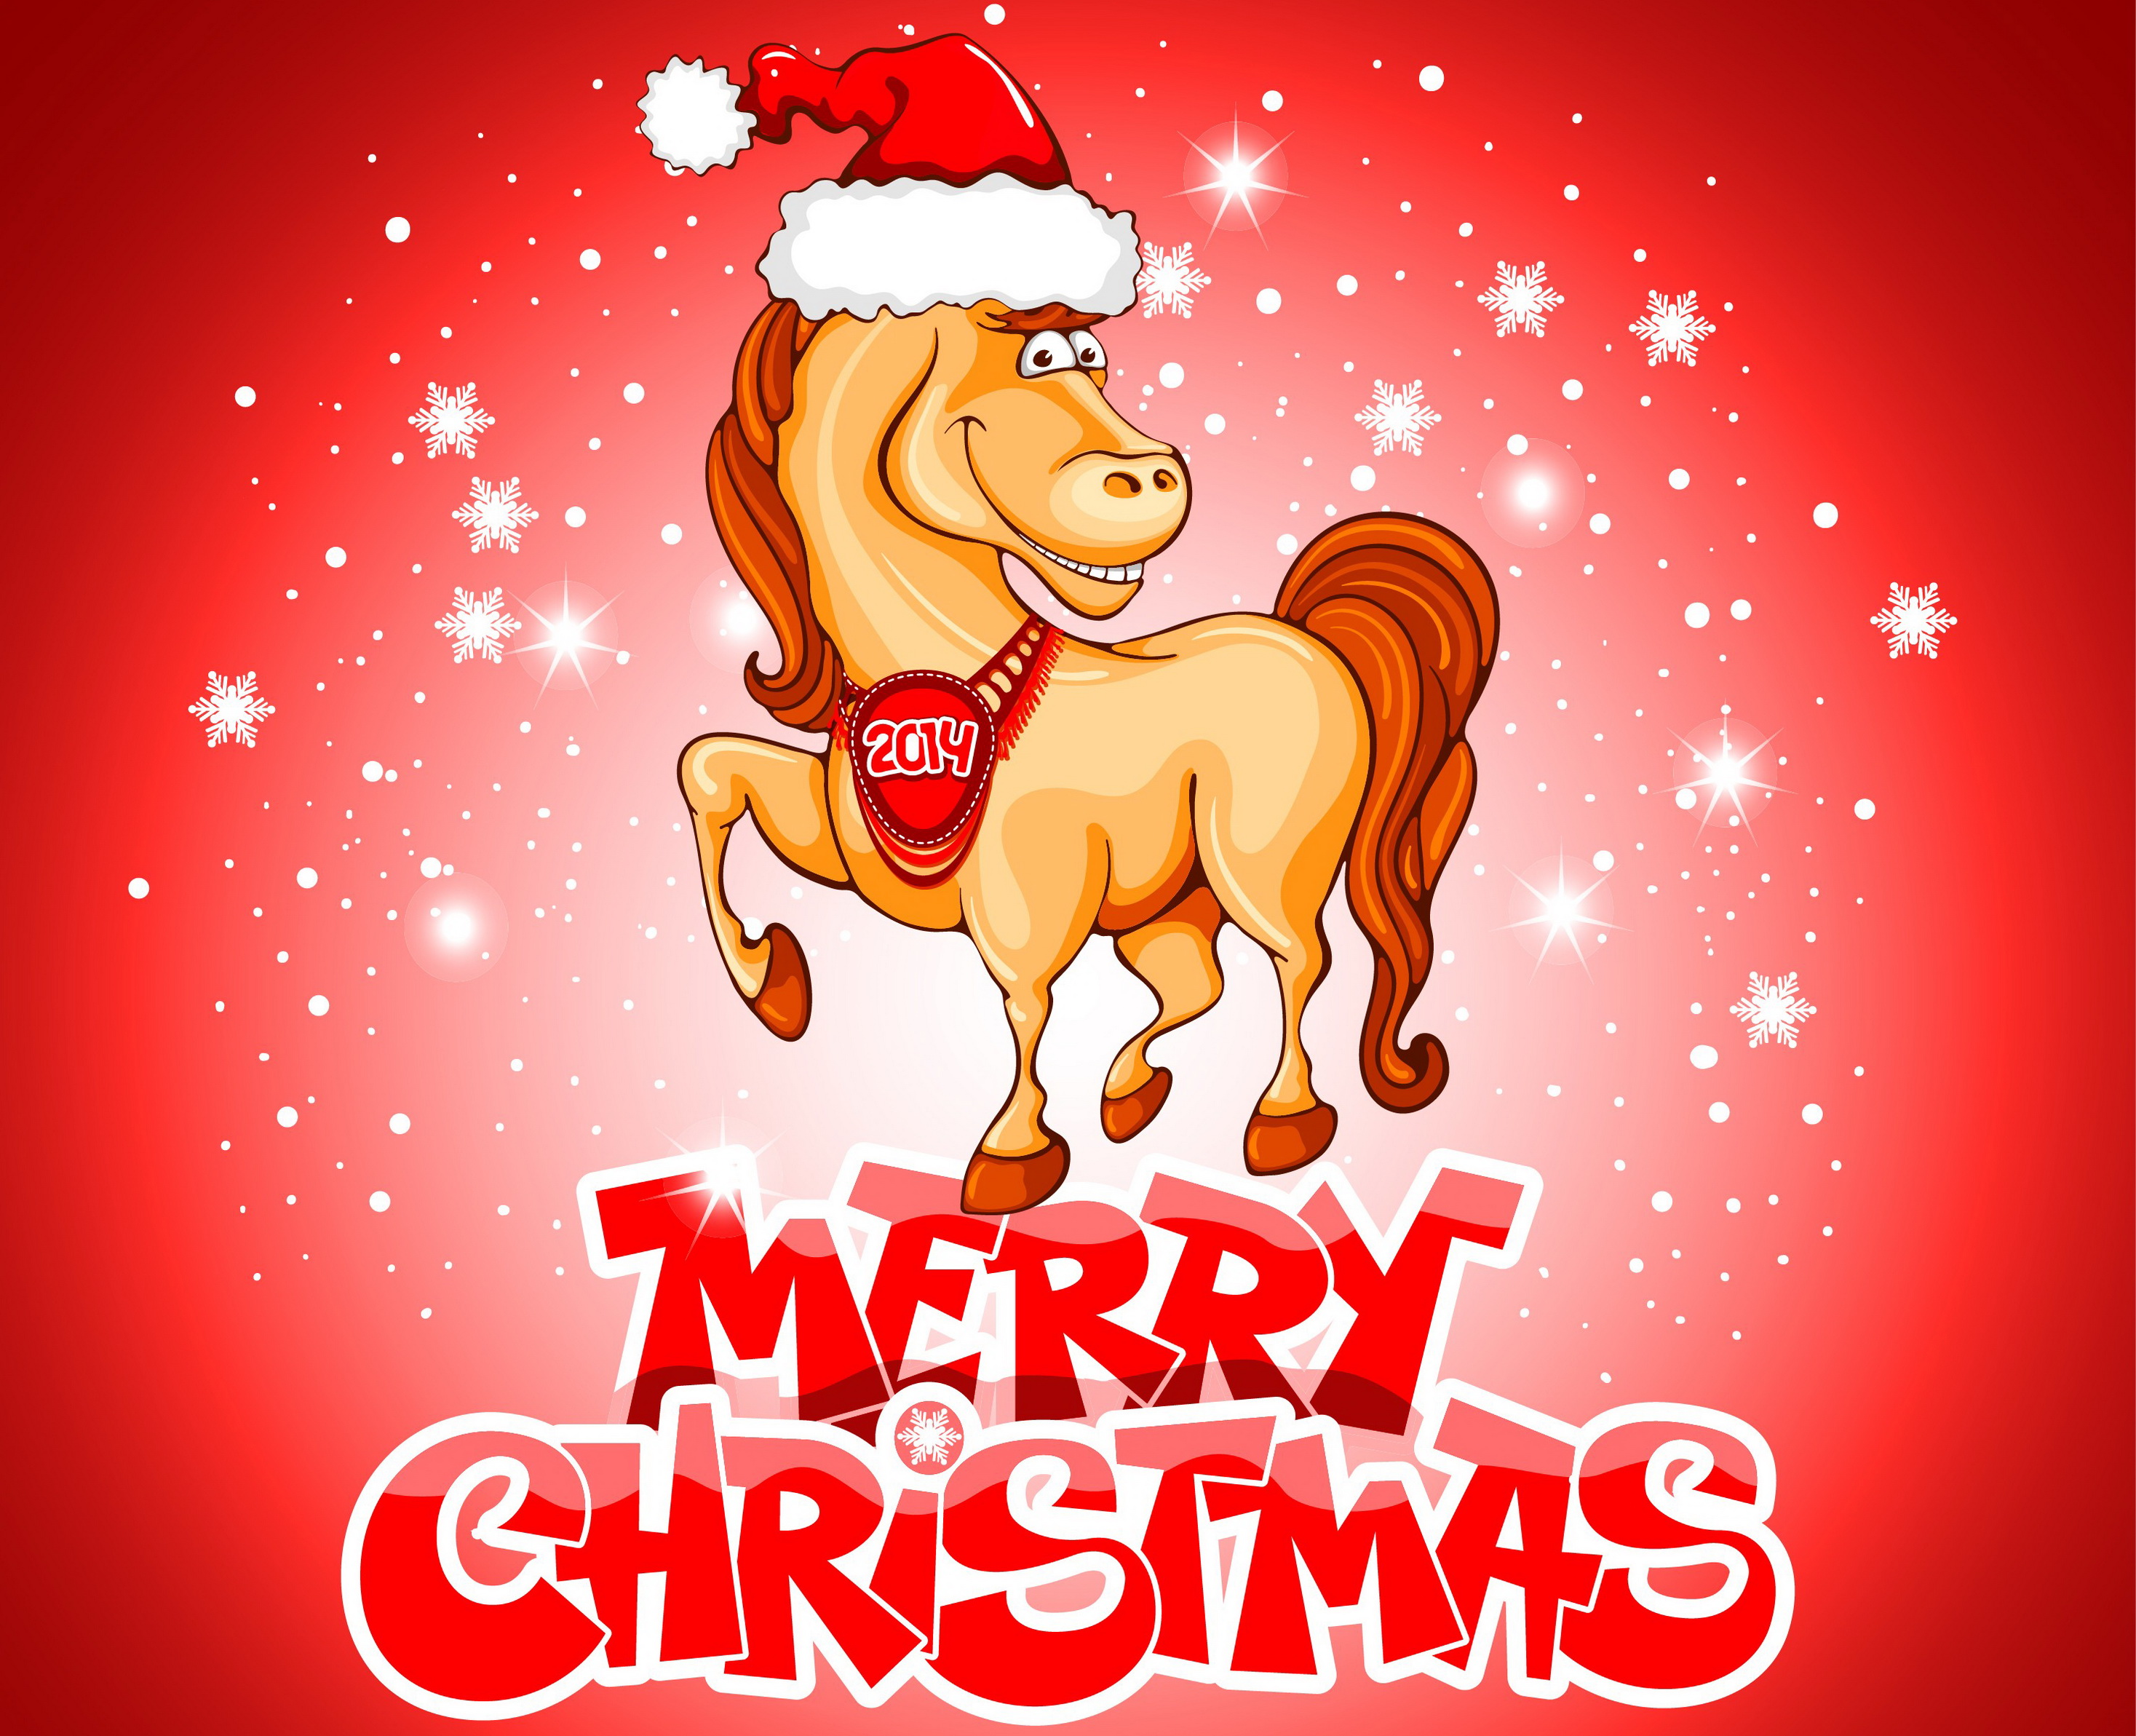 9800 Christmas Horse Stock Photos Pictures  RoyaltyFree Images   iStock  Christmas horse sleigh Christmas horse and dog Merry christmas  horse